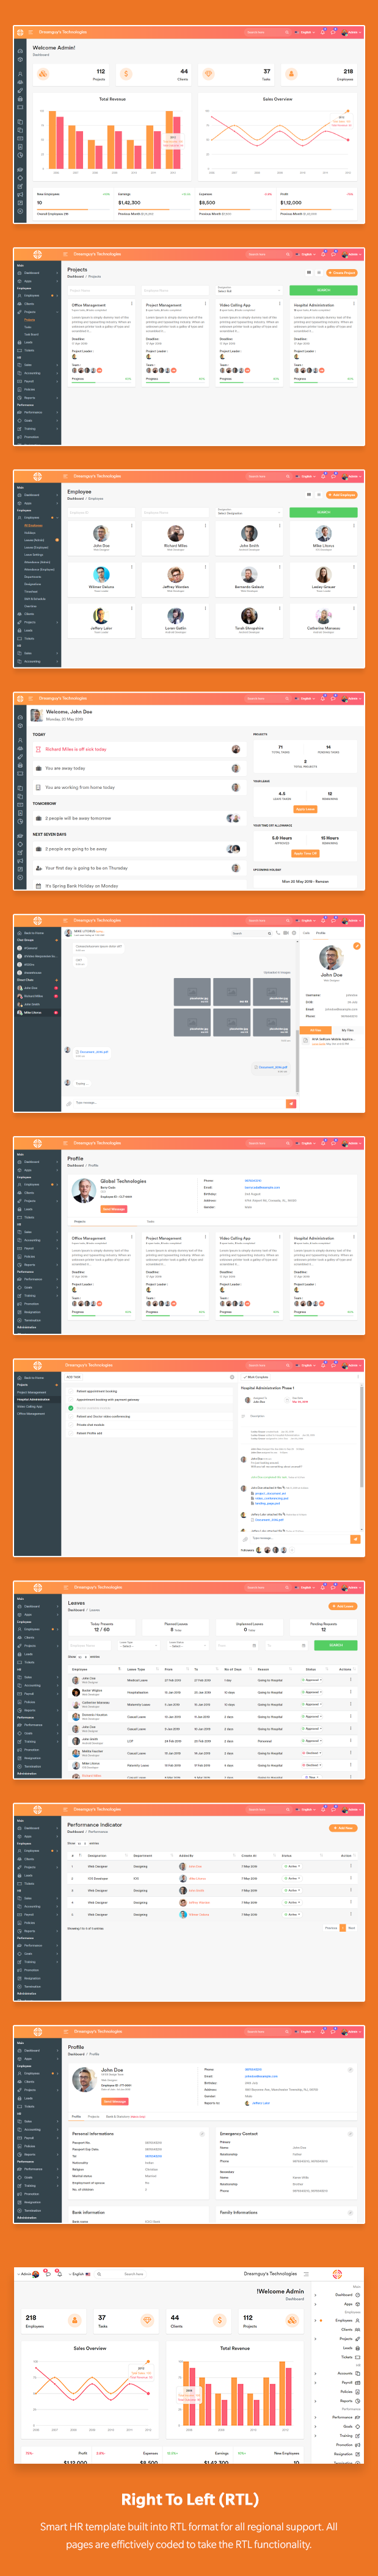 SmartHR - HRMS, Payroll, and HR Project Management Admin Dashboard Template (React + Html) - 3